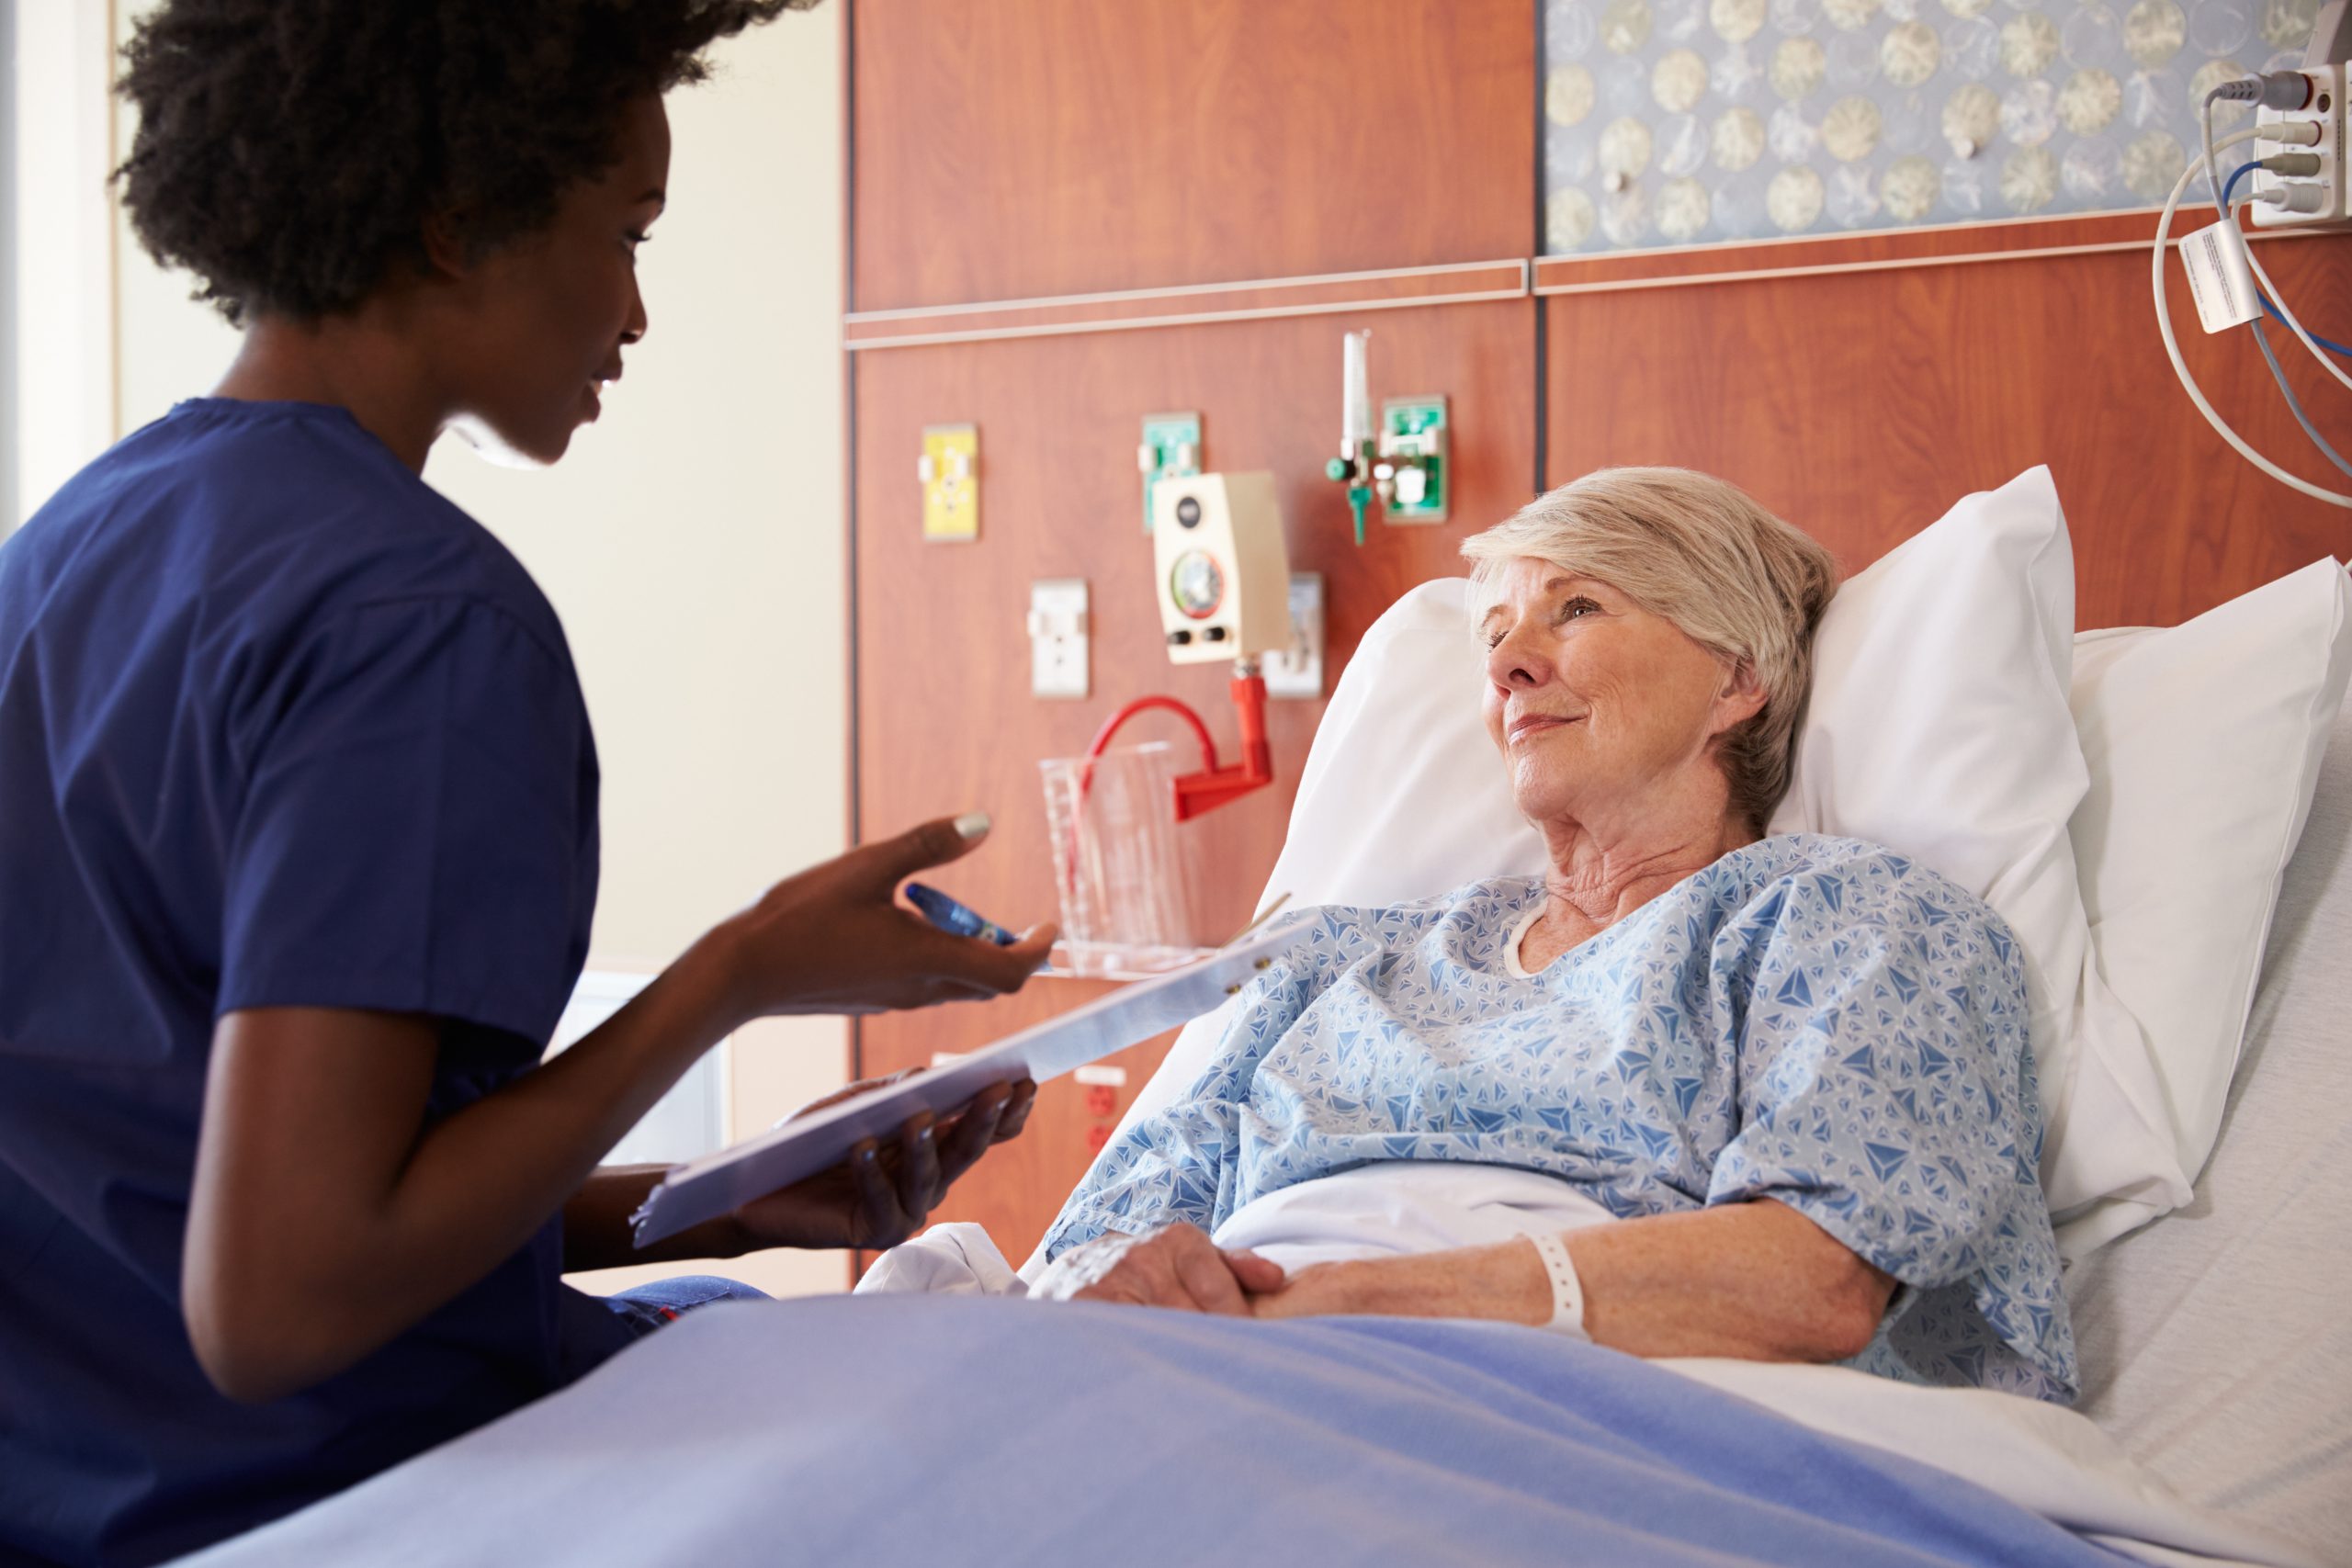 Image showing a nurse speaking with an elderly patient who is sitting up in a hospital bed